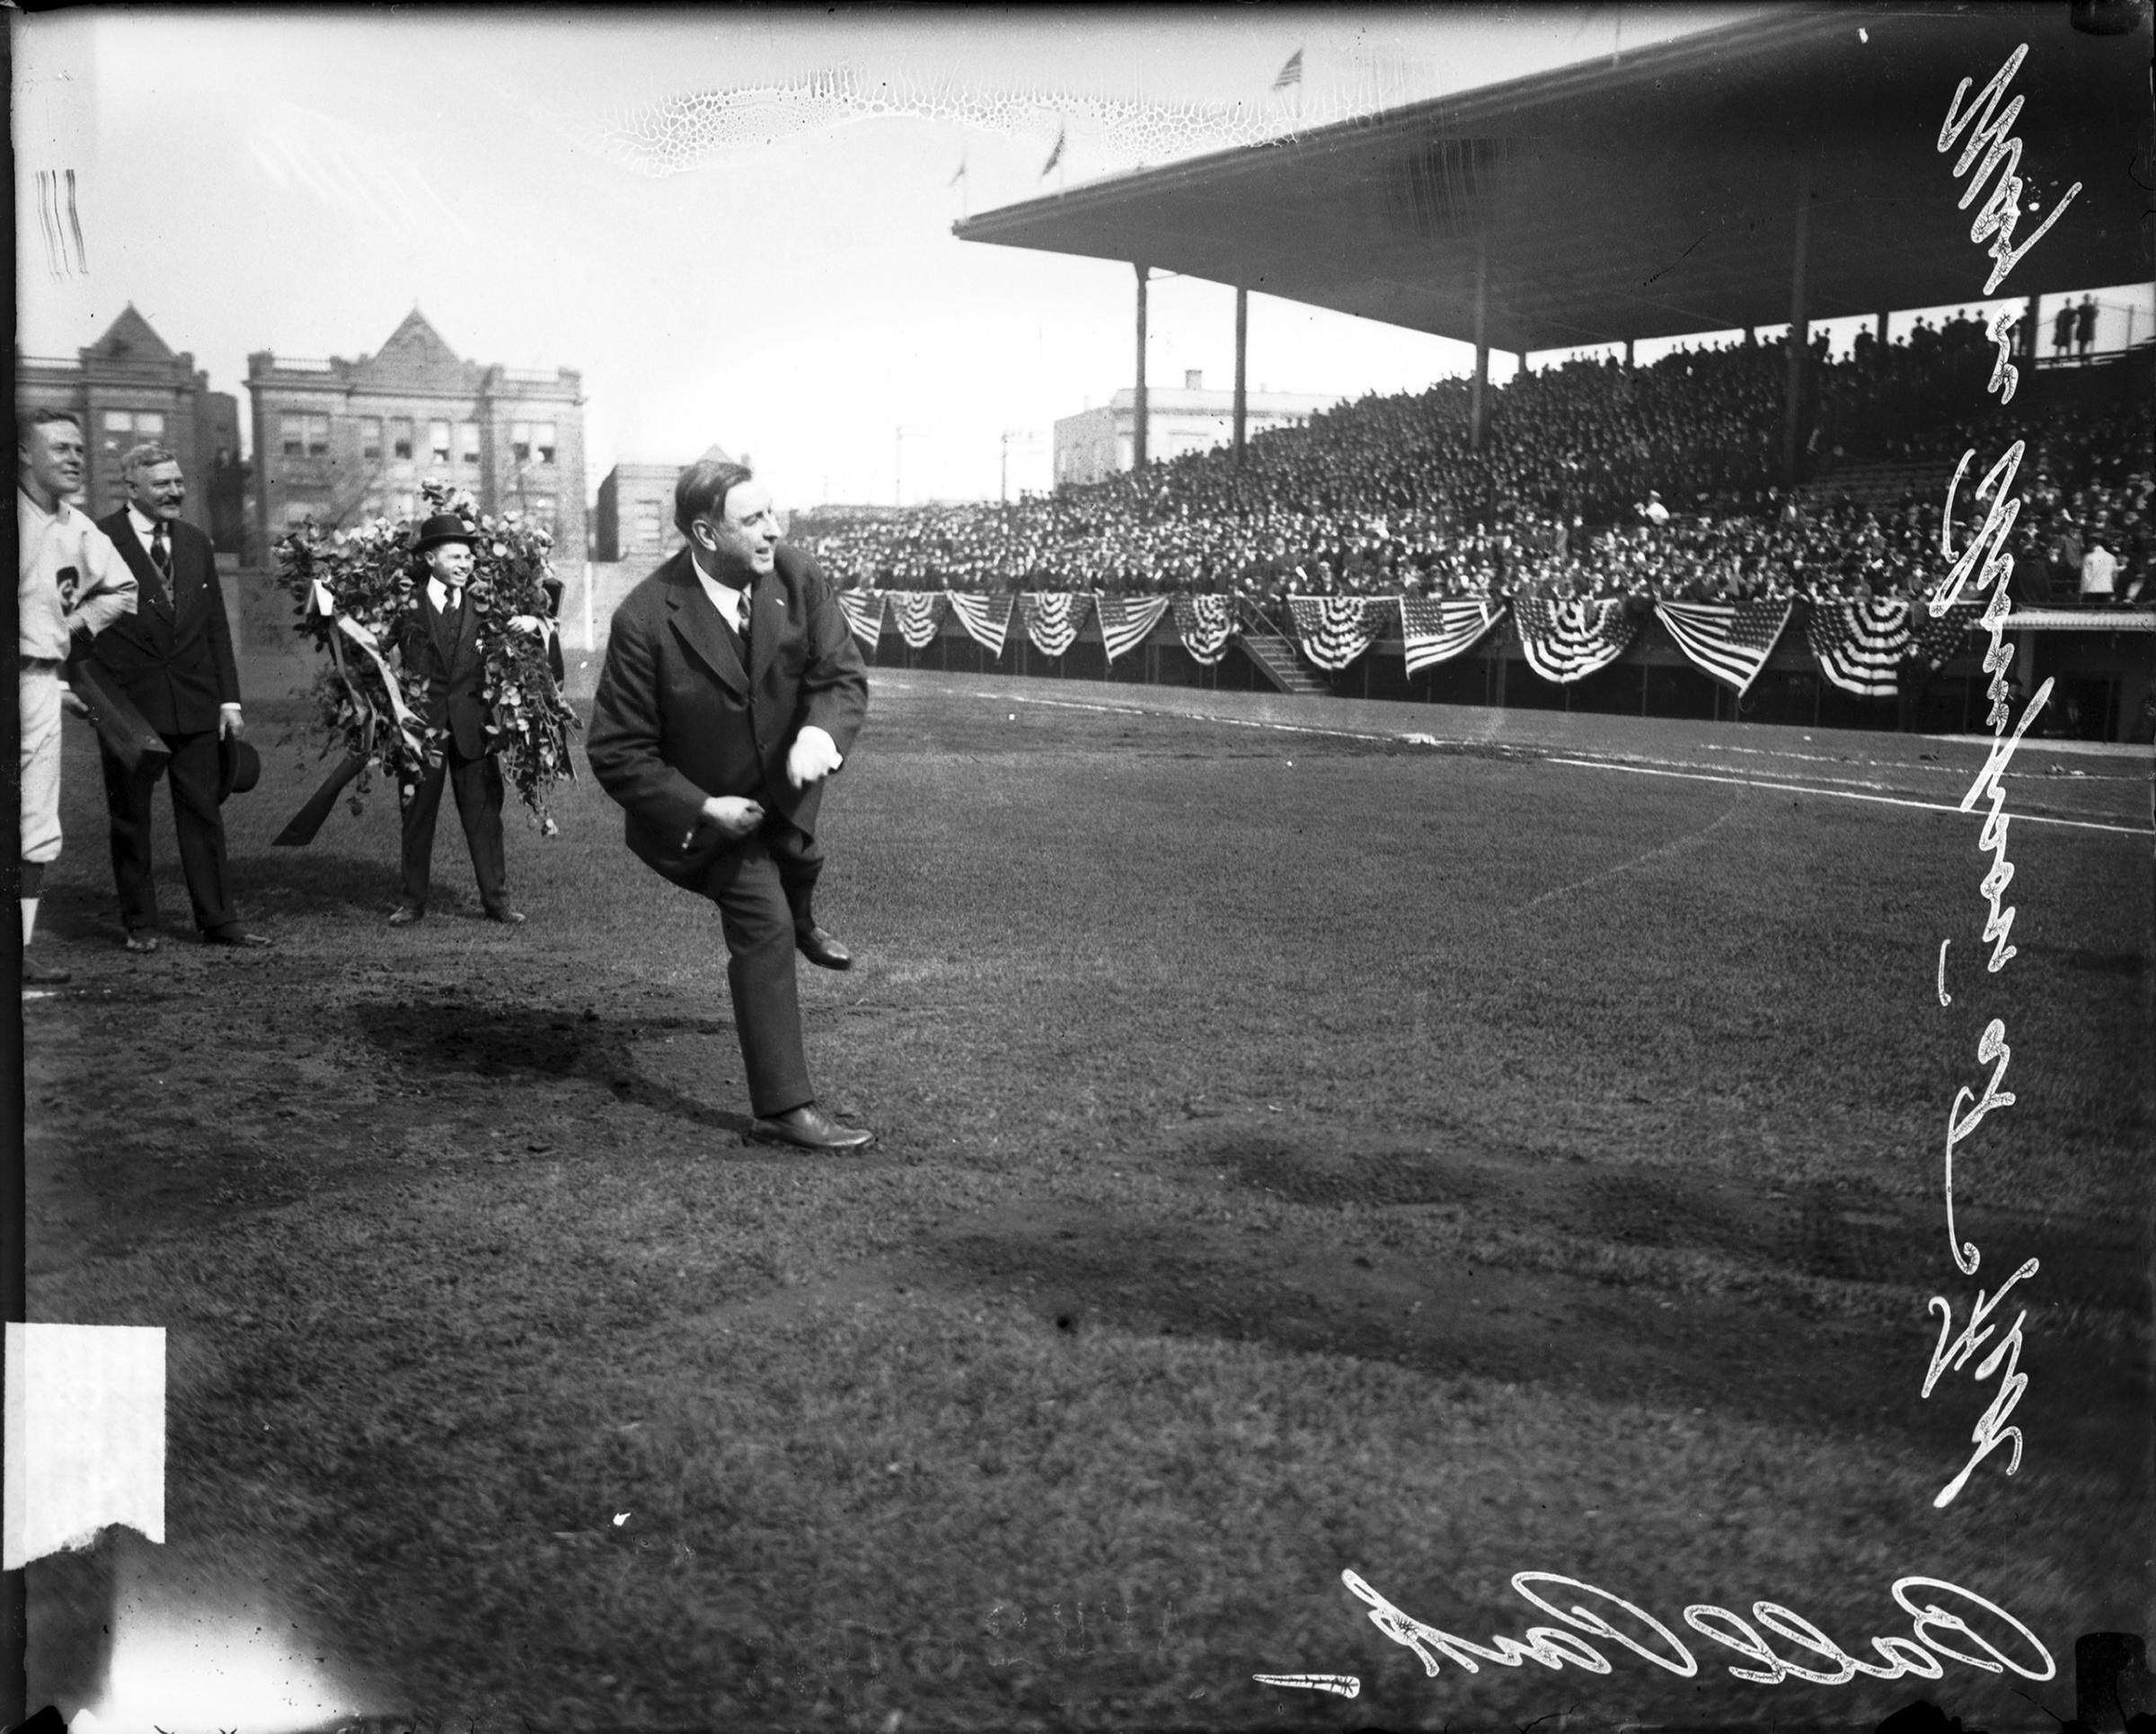 Chicago Mayor William Hale Thompson throwing first pitch at a Chicago Whales baseball game at Weeghman Park, Chicago, Illinois, 1915.